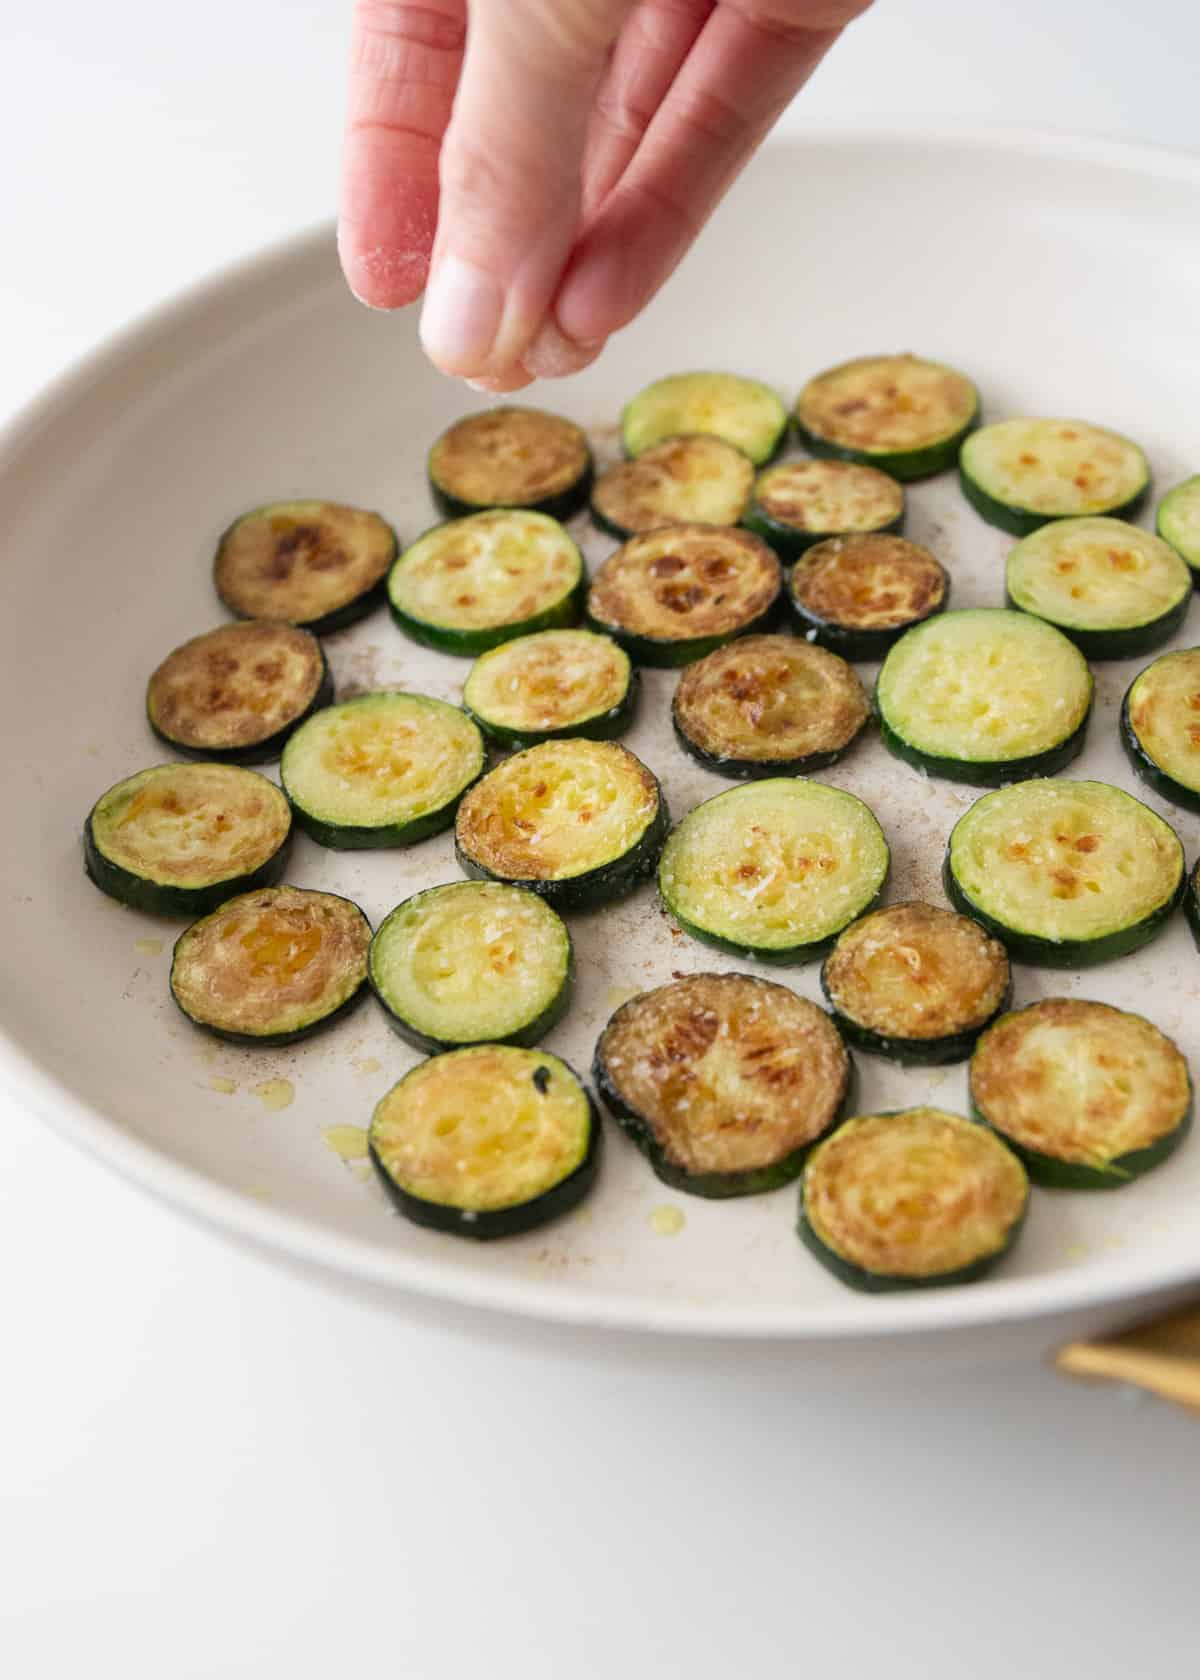 sprinkling salt on roasted zucchini slices in a round baking dish